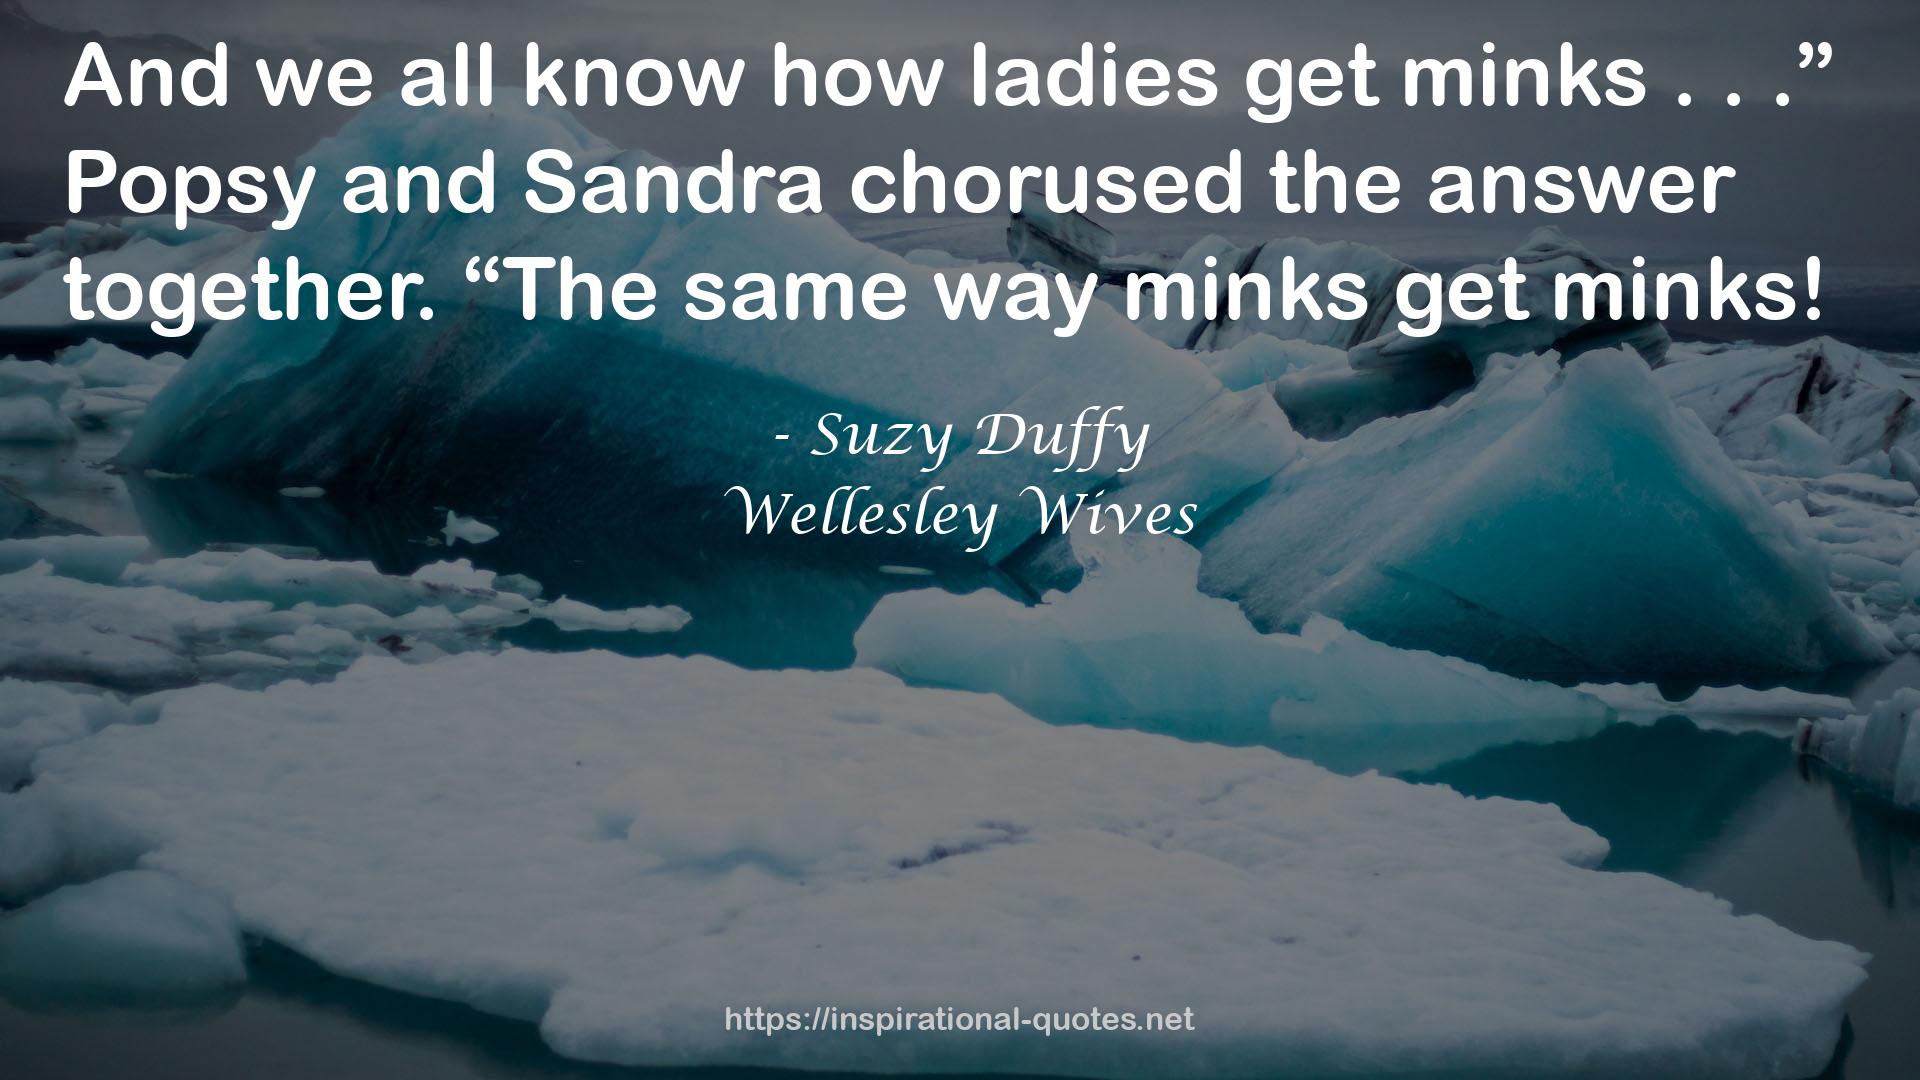 Wellesley Wives QUOTES